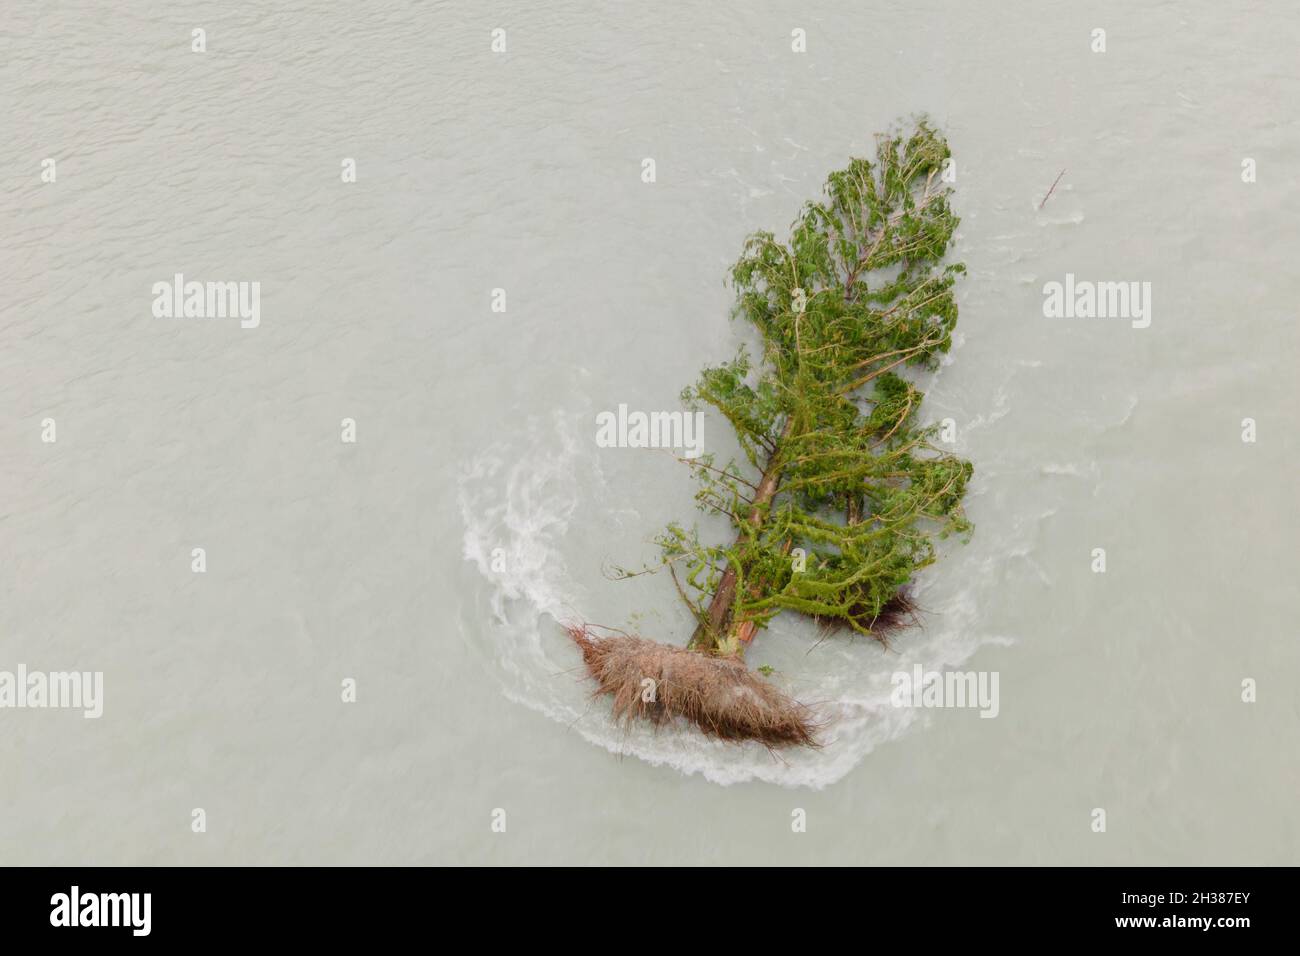 Tree taken by big rain event intensified by climate change. Stock Photo